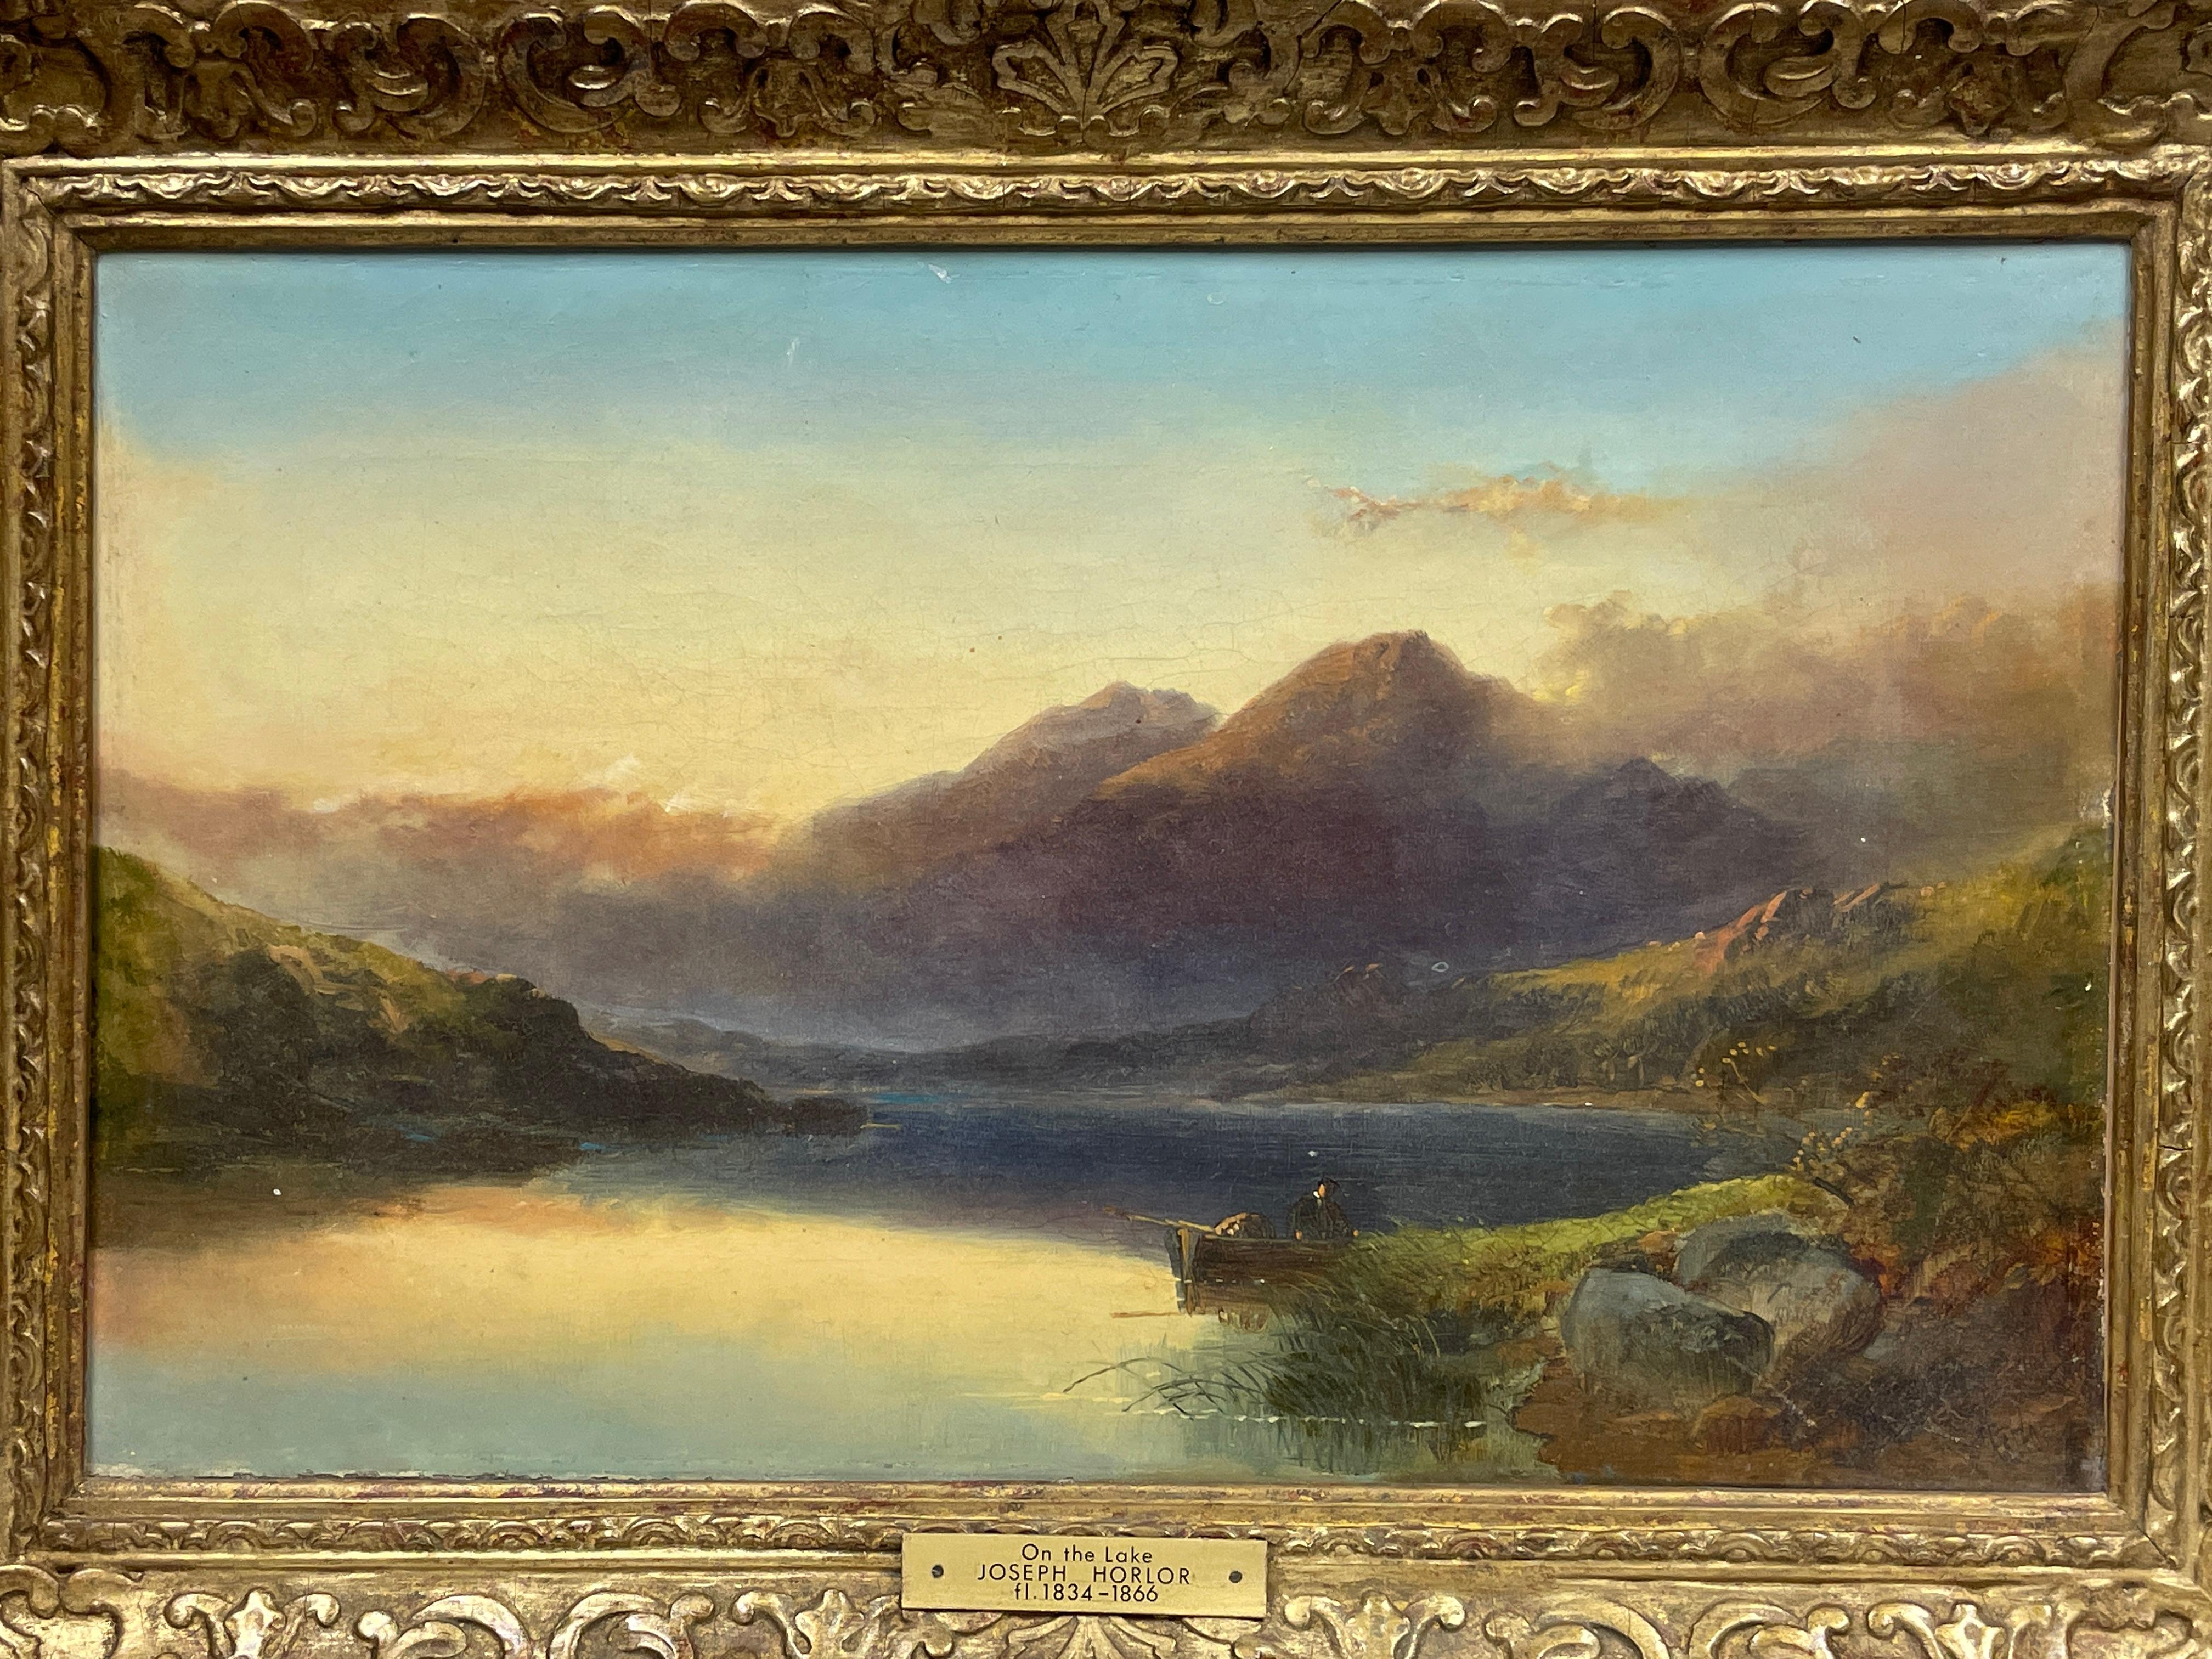 Fine Victorian Oil Figure in Rowing Boat at Sunset on Scottish Loch in Highlands - Beige Landscape Painting by Joseph Horlor